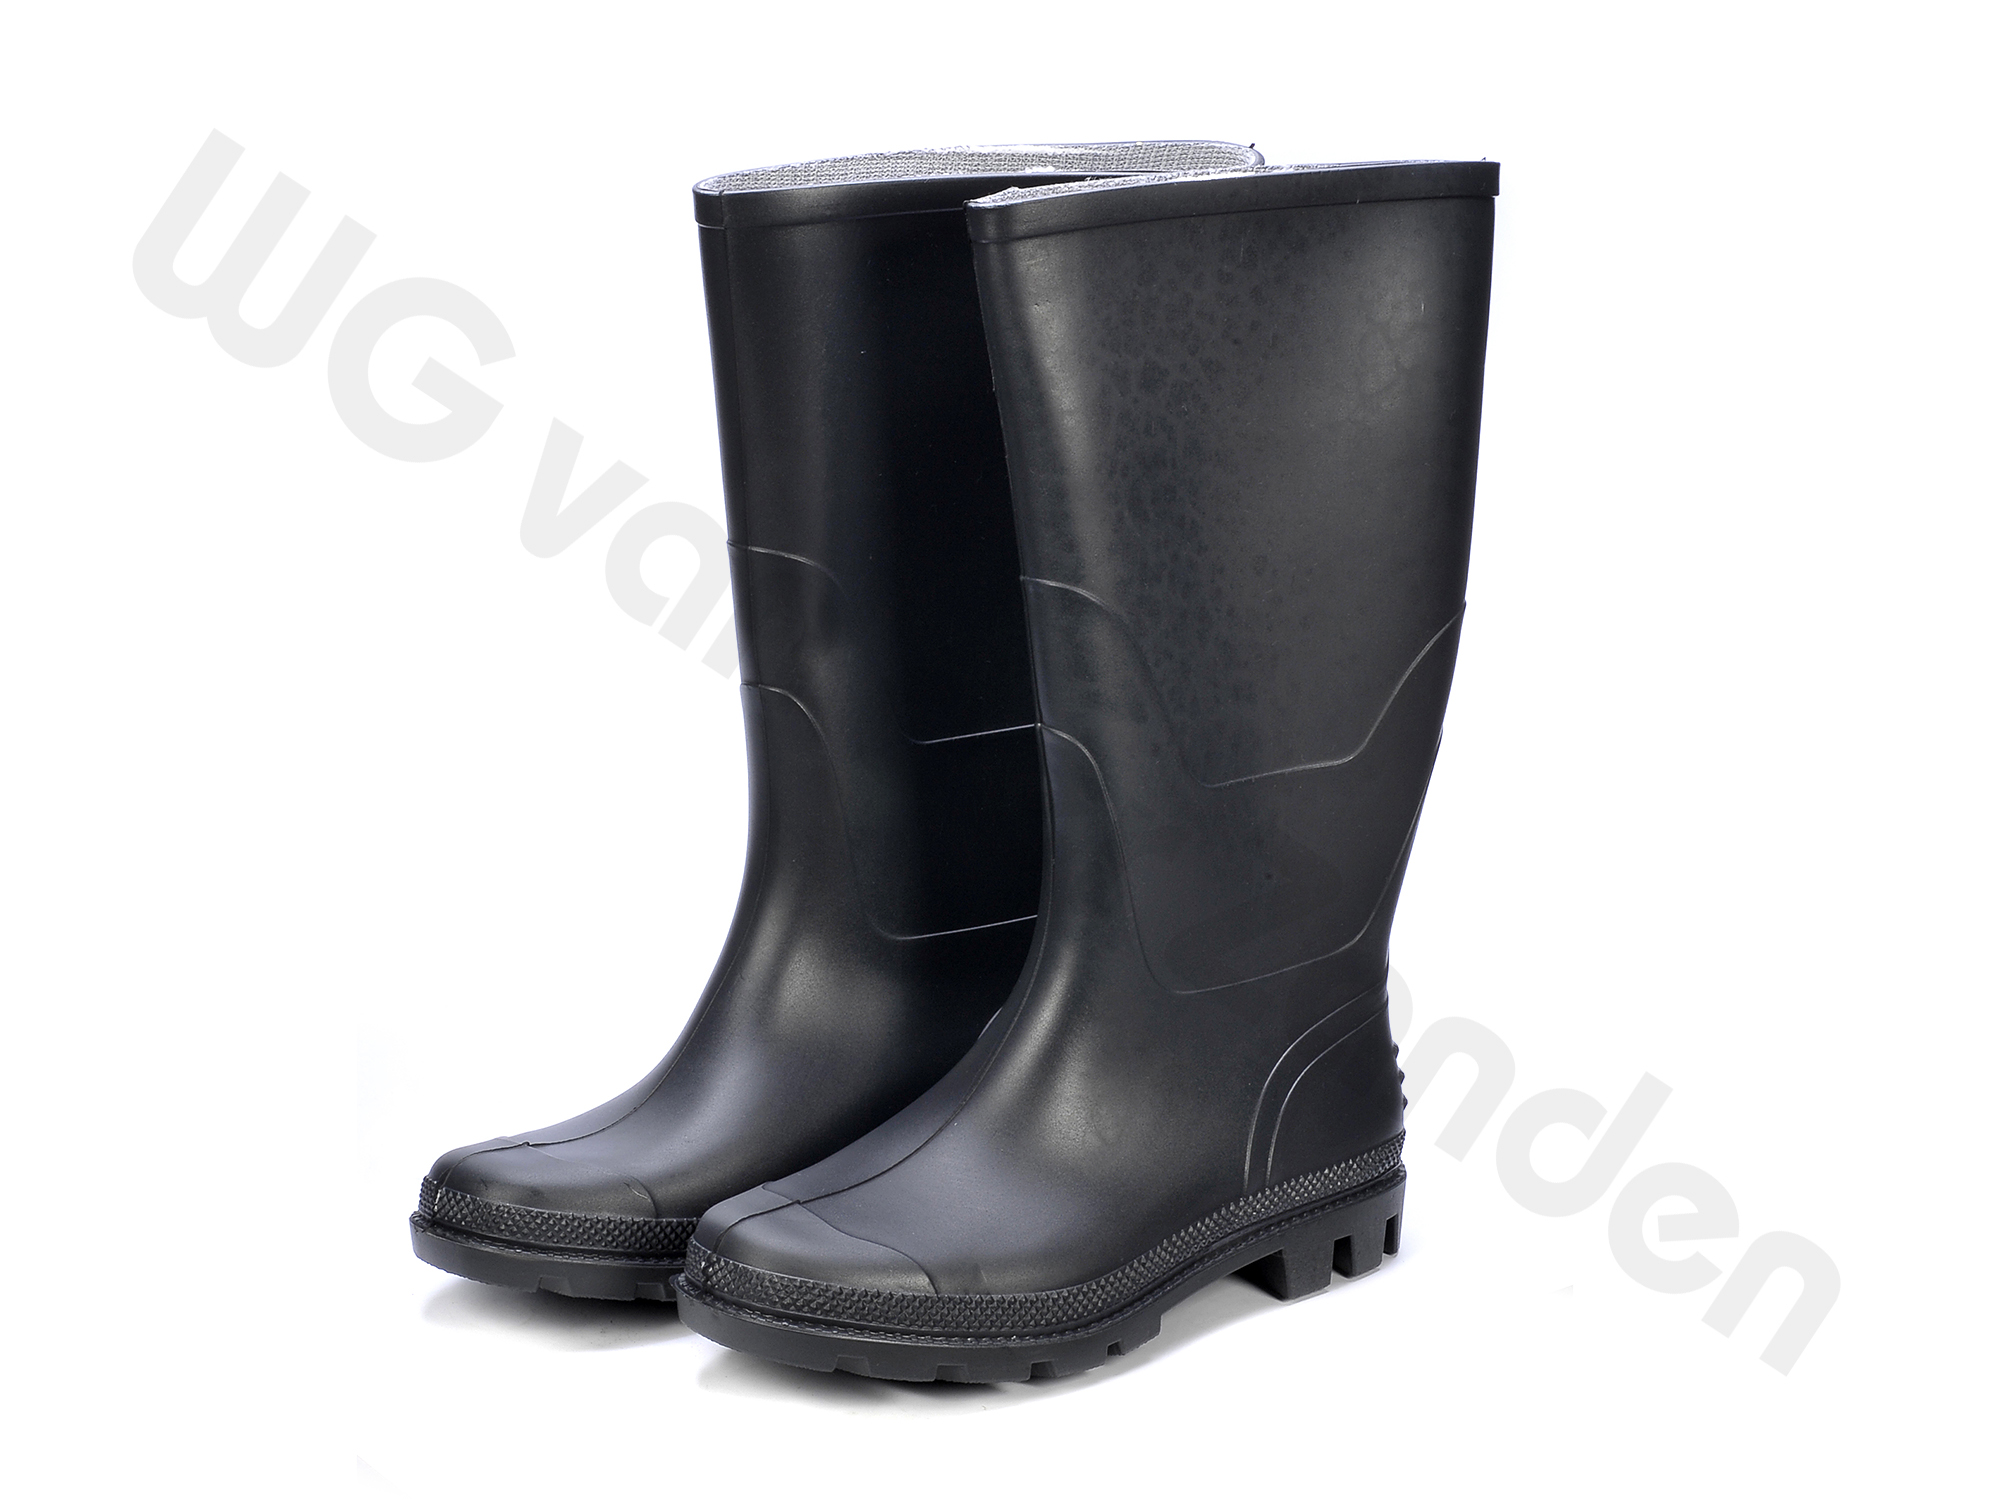 880199 BOOTS SAFETY S4 PVC WITH STEEL TOE SIZE 36/24CM CE